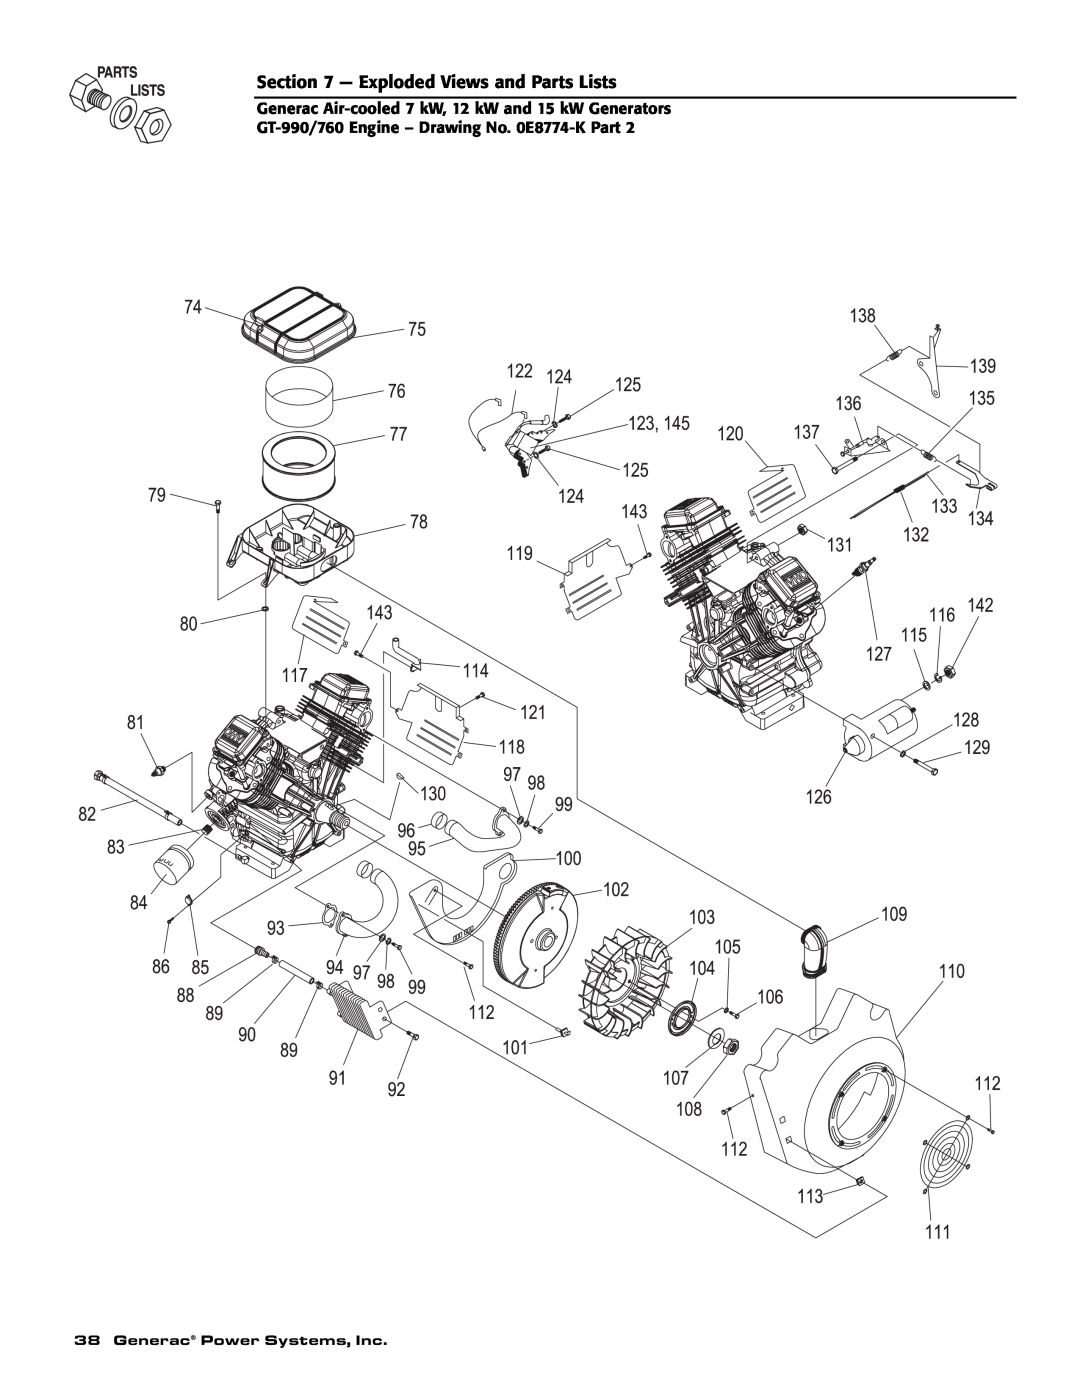 Generac 04675-3, 04673-2, 04674-2 owner manual Exploded Views and Parts Lists, Generac Power Systems, Inc 